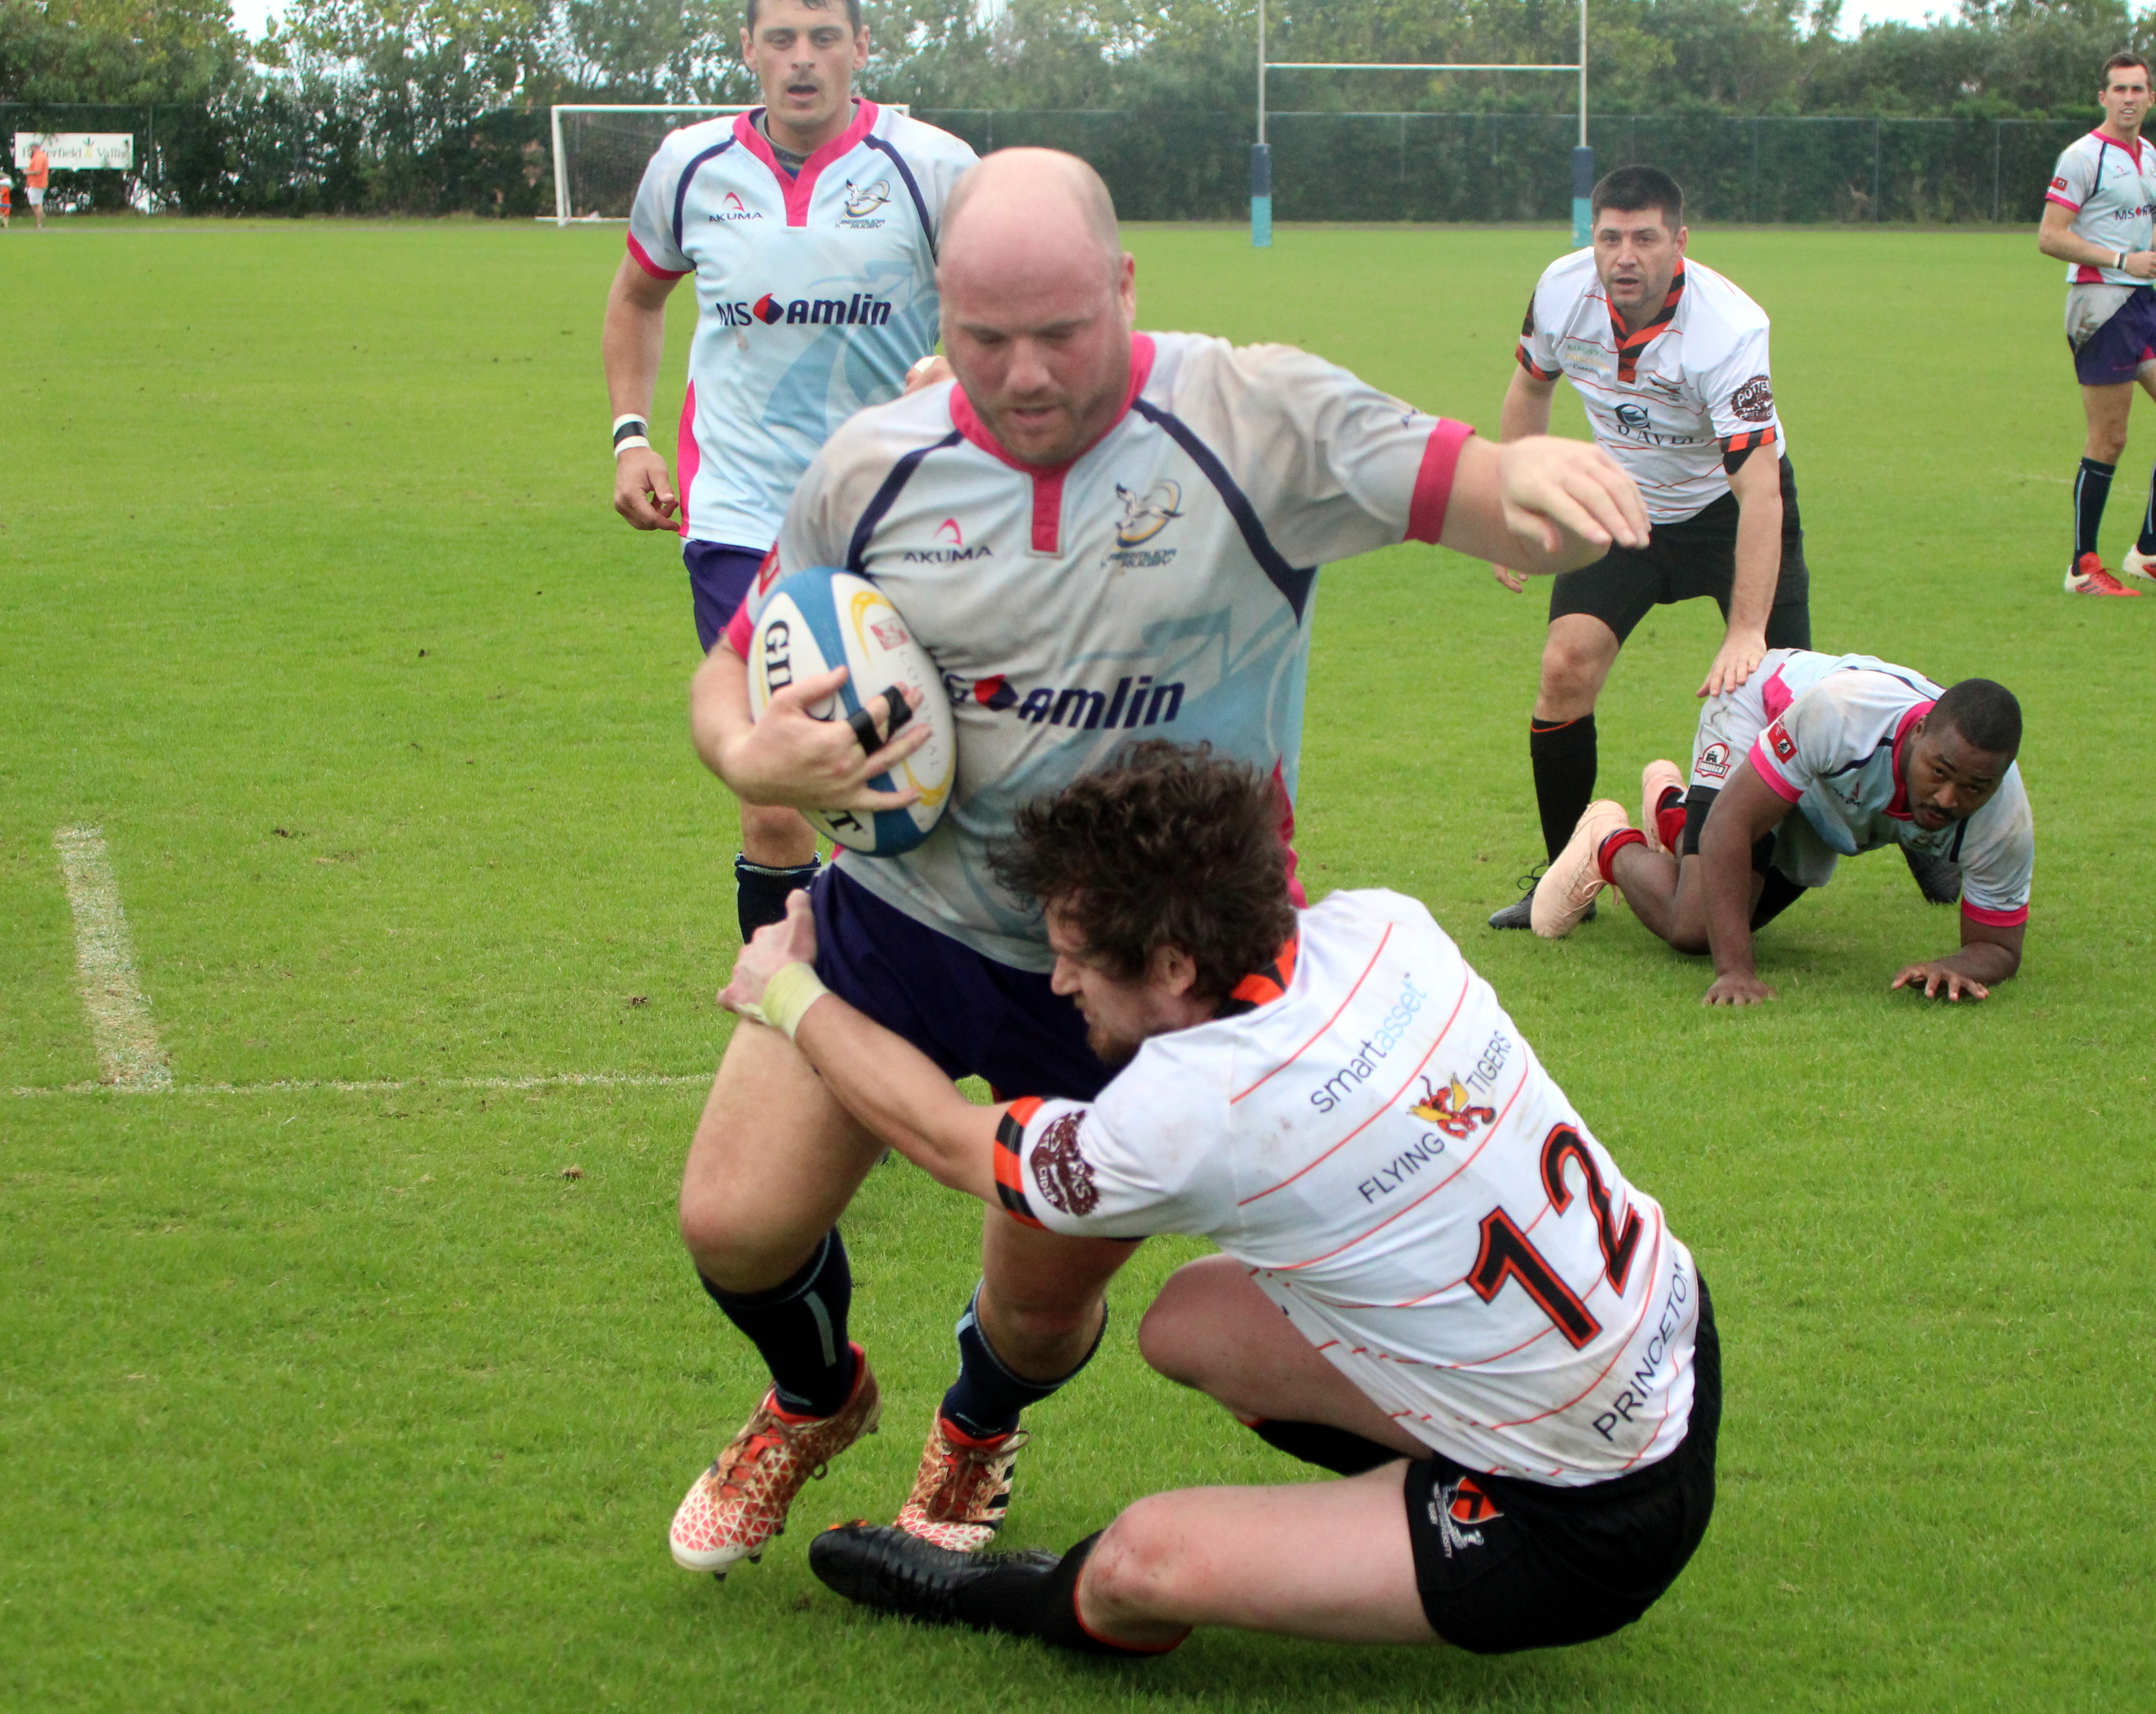 Bermuda Defeat Princeton Tigers at the Sports Center (Rugby)